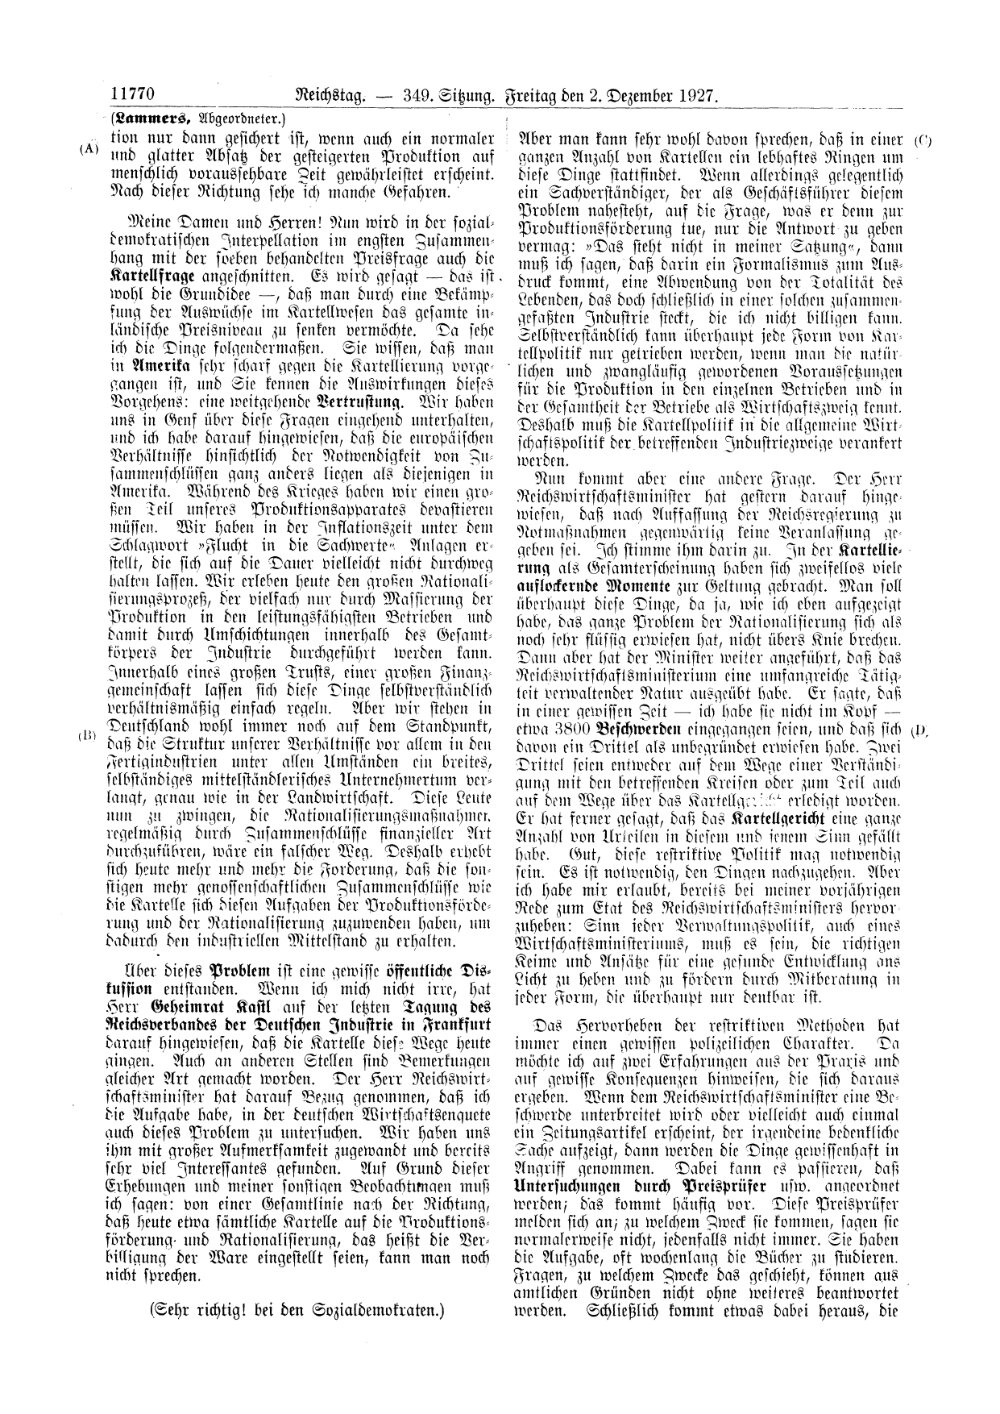 Scan of page 11770